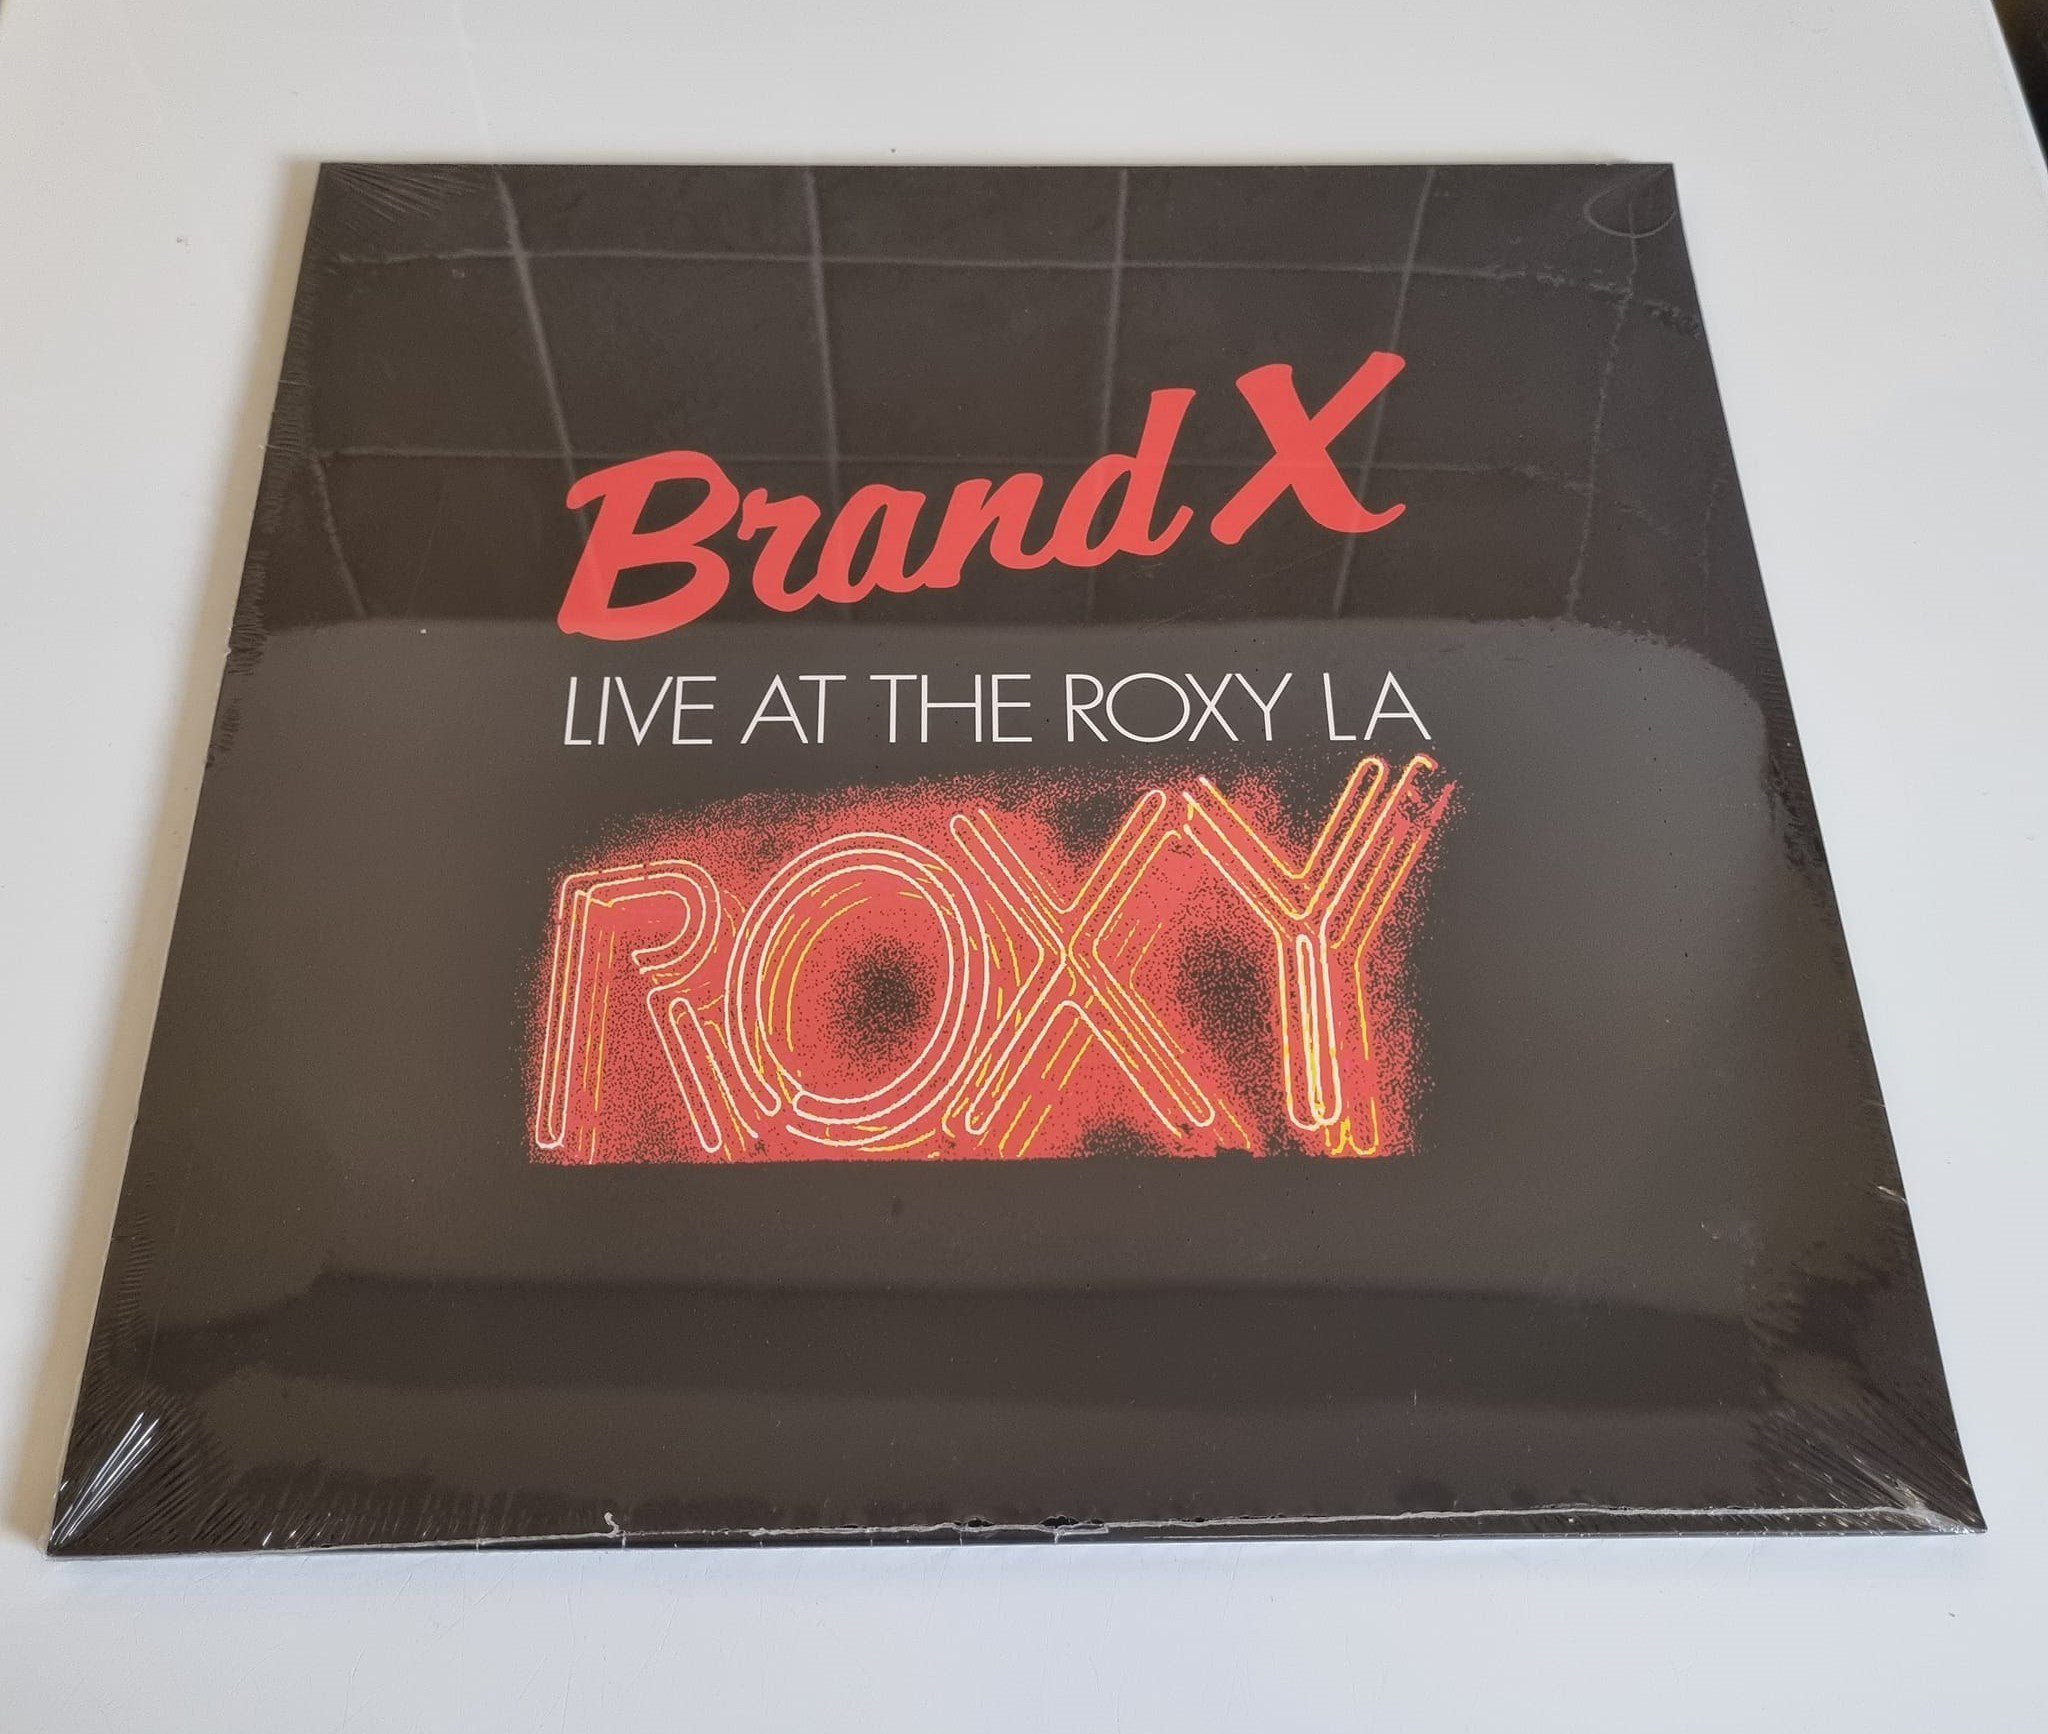 Buy this rare Brand X record by clicking here